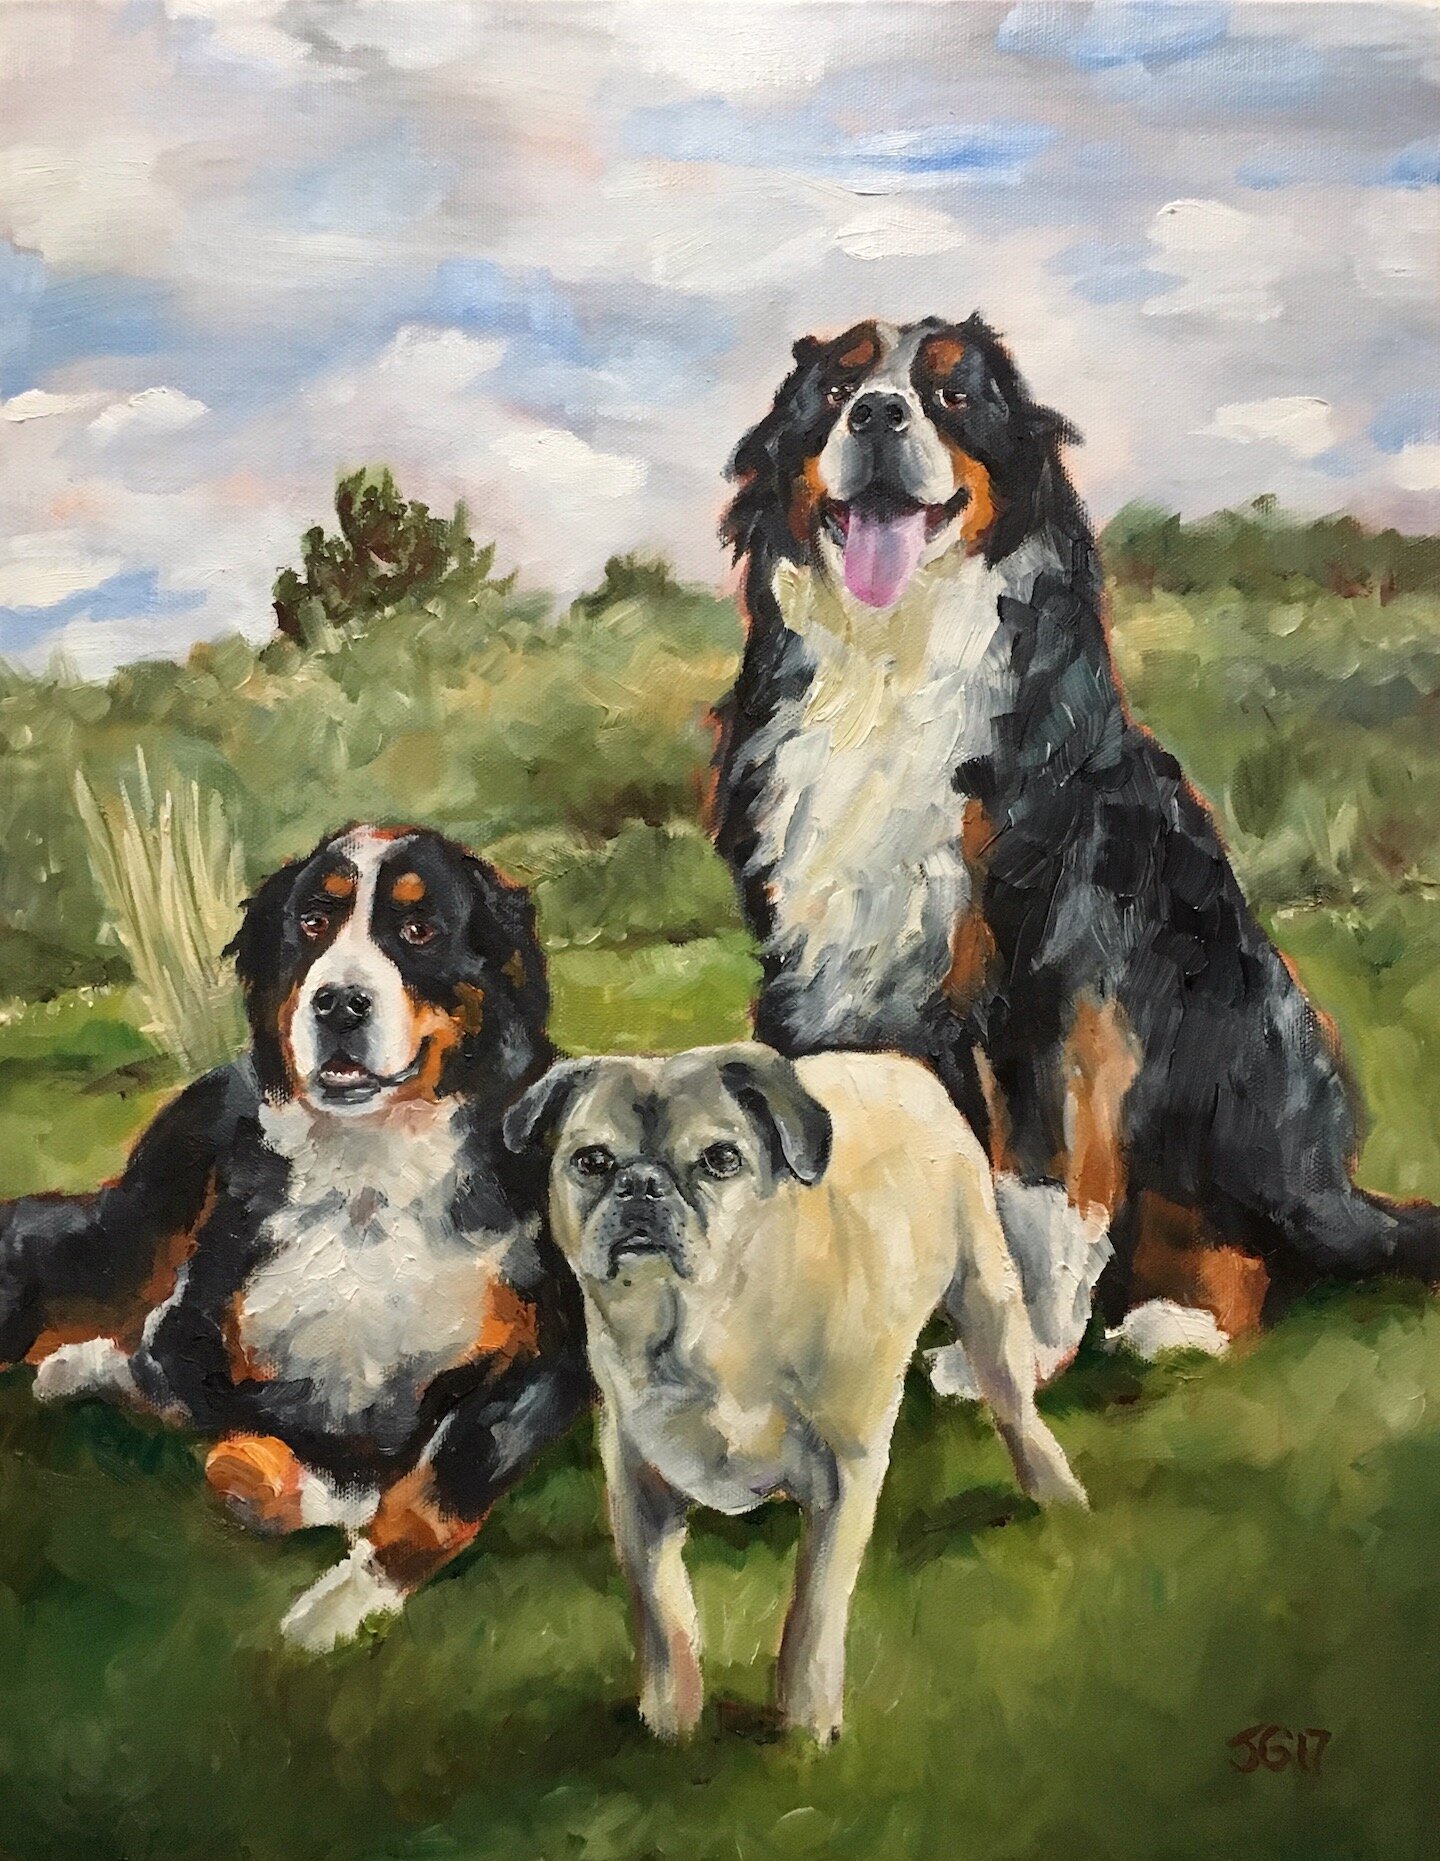  Painting of three dogs in a grassy landscape. Two are Bernese mountain dogs—one lying down at left, one seated upright at right—and one is a beige pug, standing in front of the others. The landscape behind them is hilly, with tall grass and trees, u